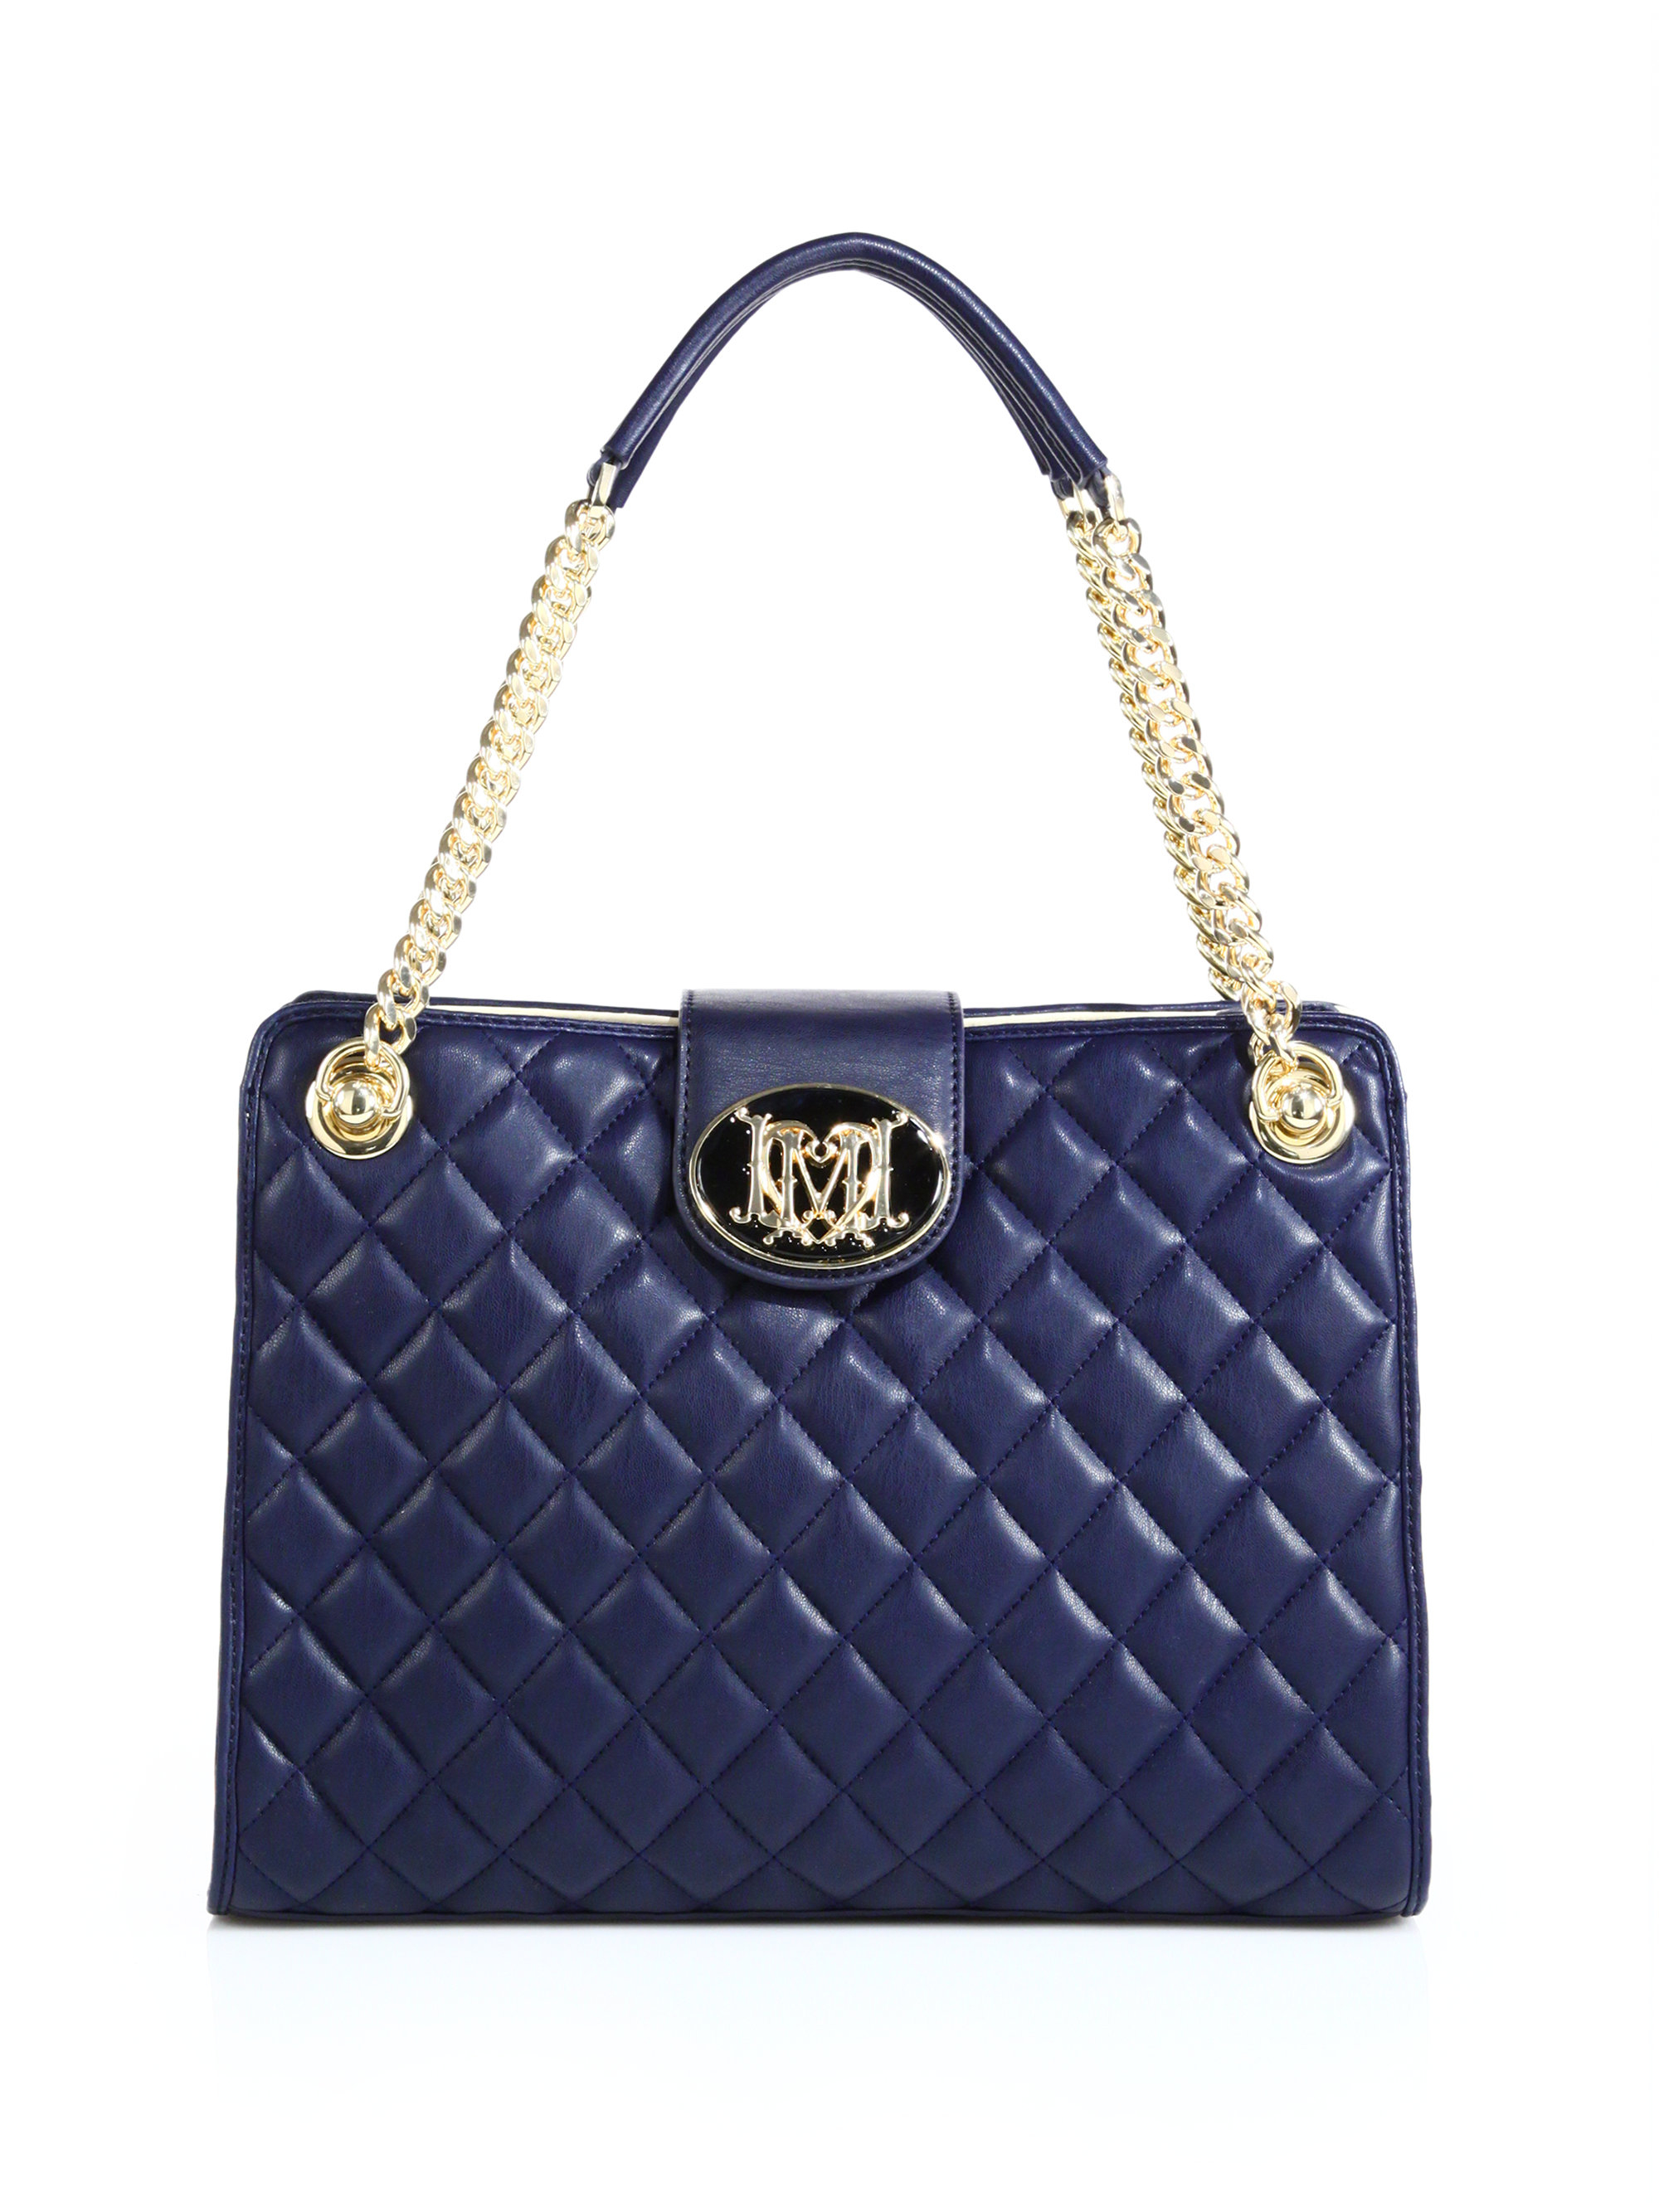 Love Moschino Chain-Strap Quilted Shoulder Bag in Navy (Blue) - Lyst